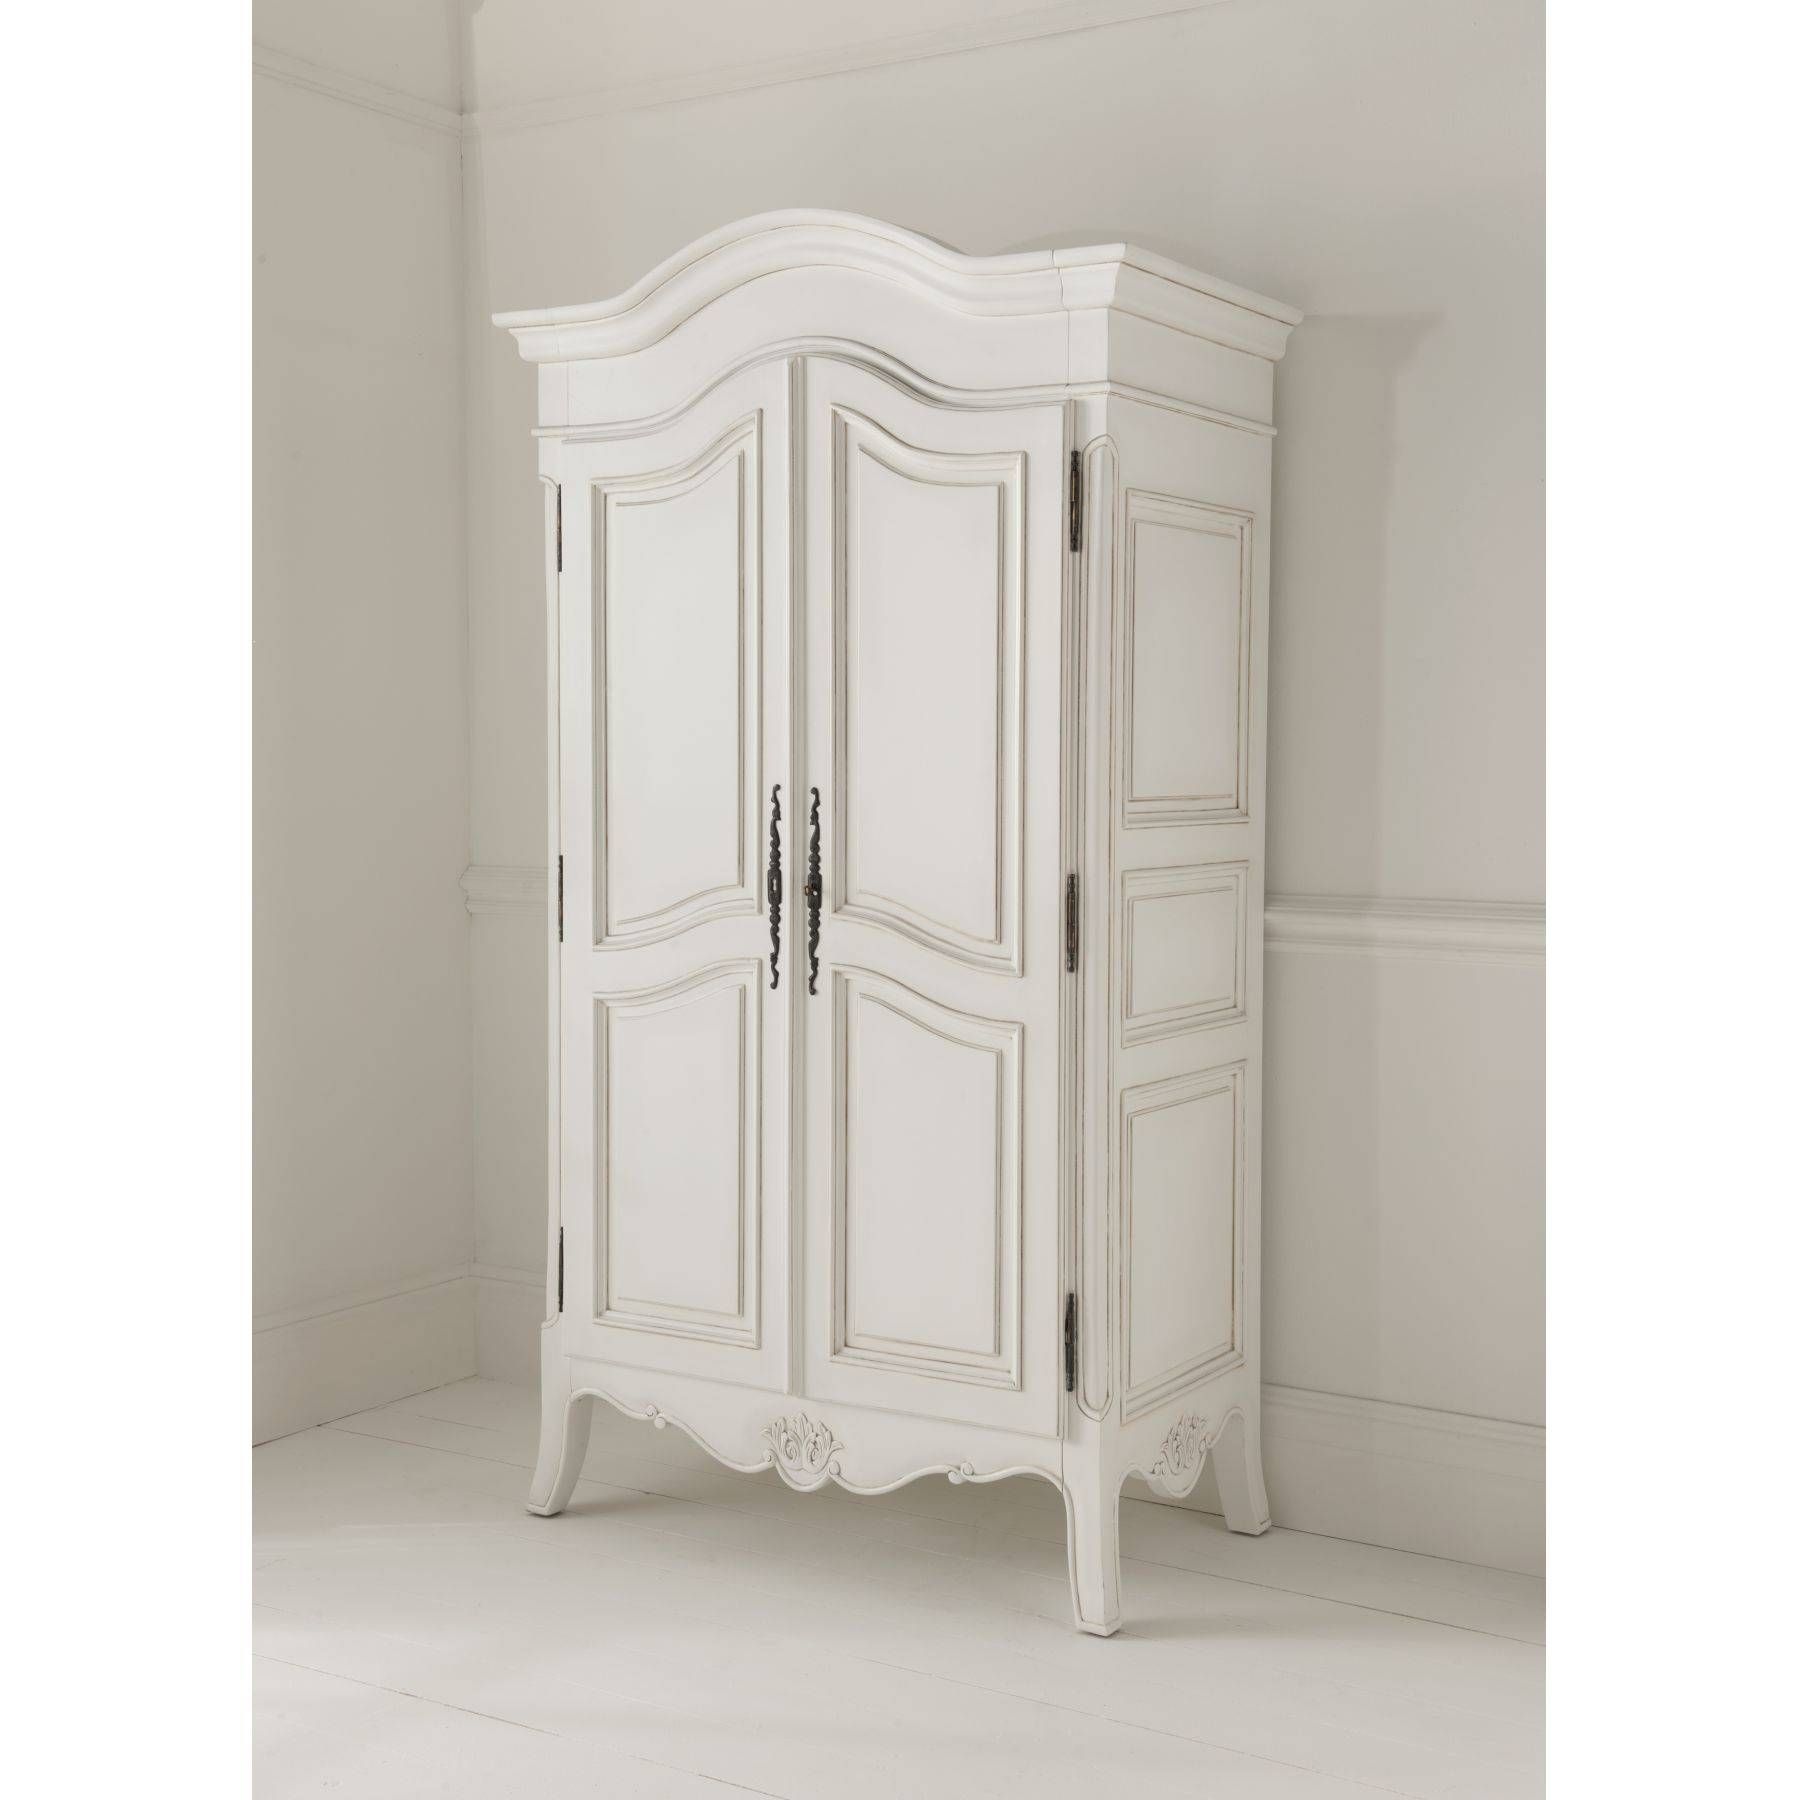 Furniture: Exciting Armoire Wardrobe For Interior Storage Design Inside White Antique Wardrobes (View 15 of 15)